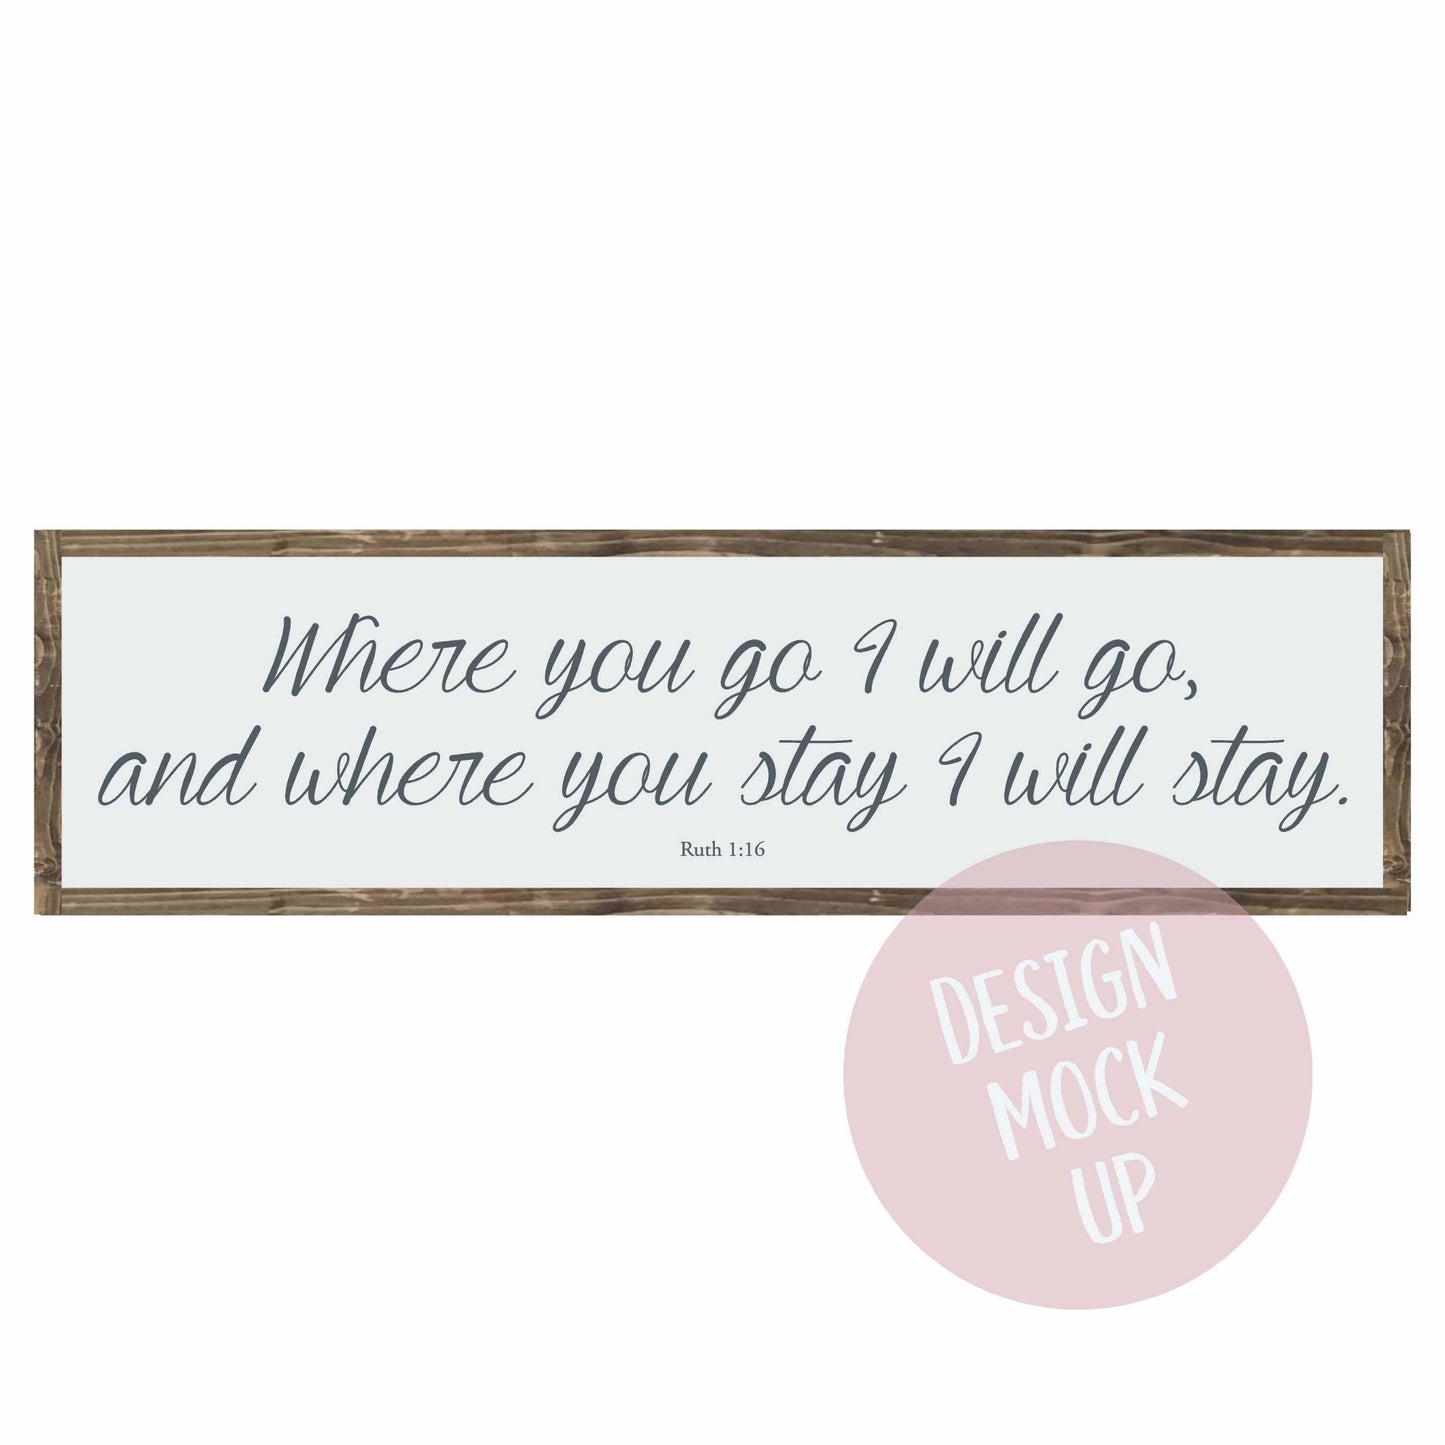 Where you go I will go | Framed Wood Sign - The Imperfect Wood Company - Framed Wood Sign